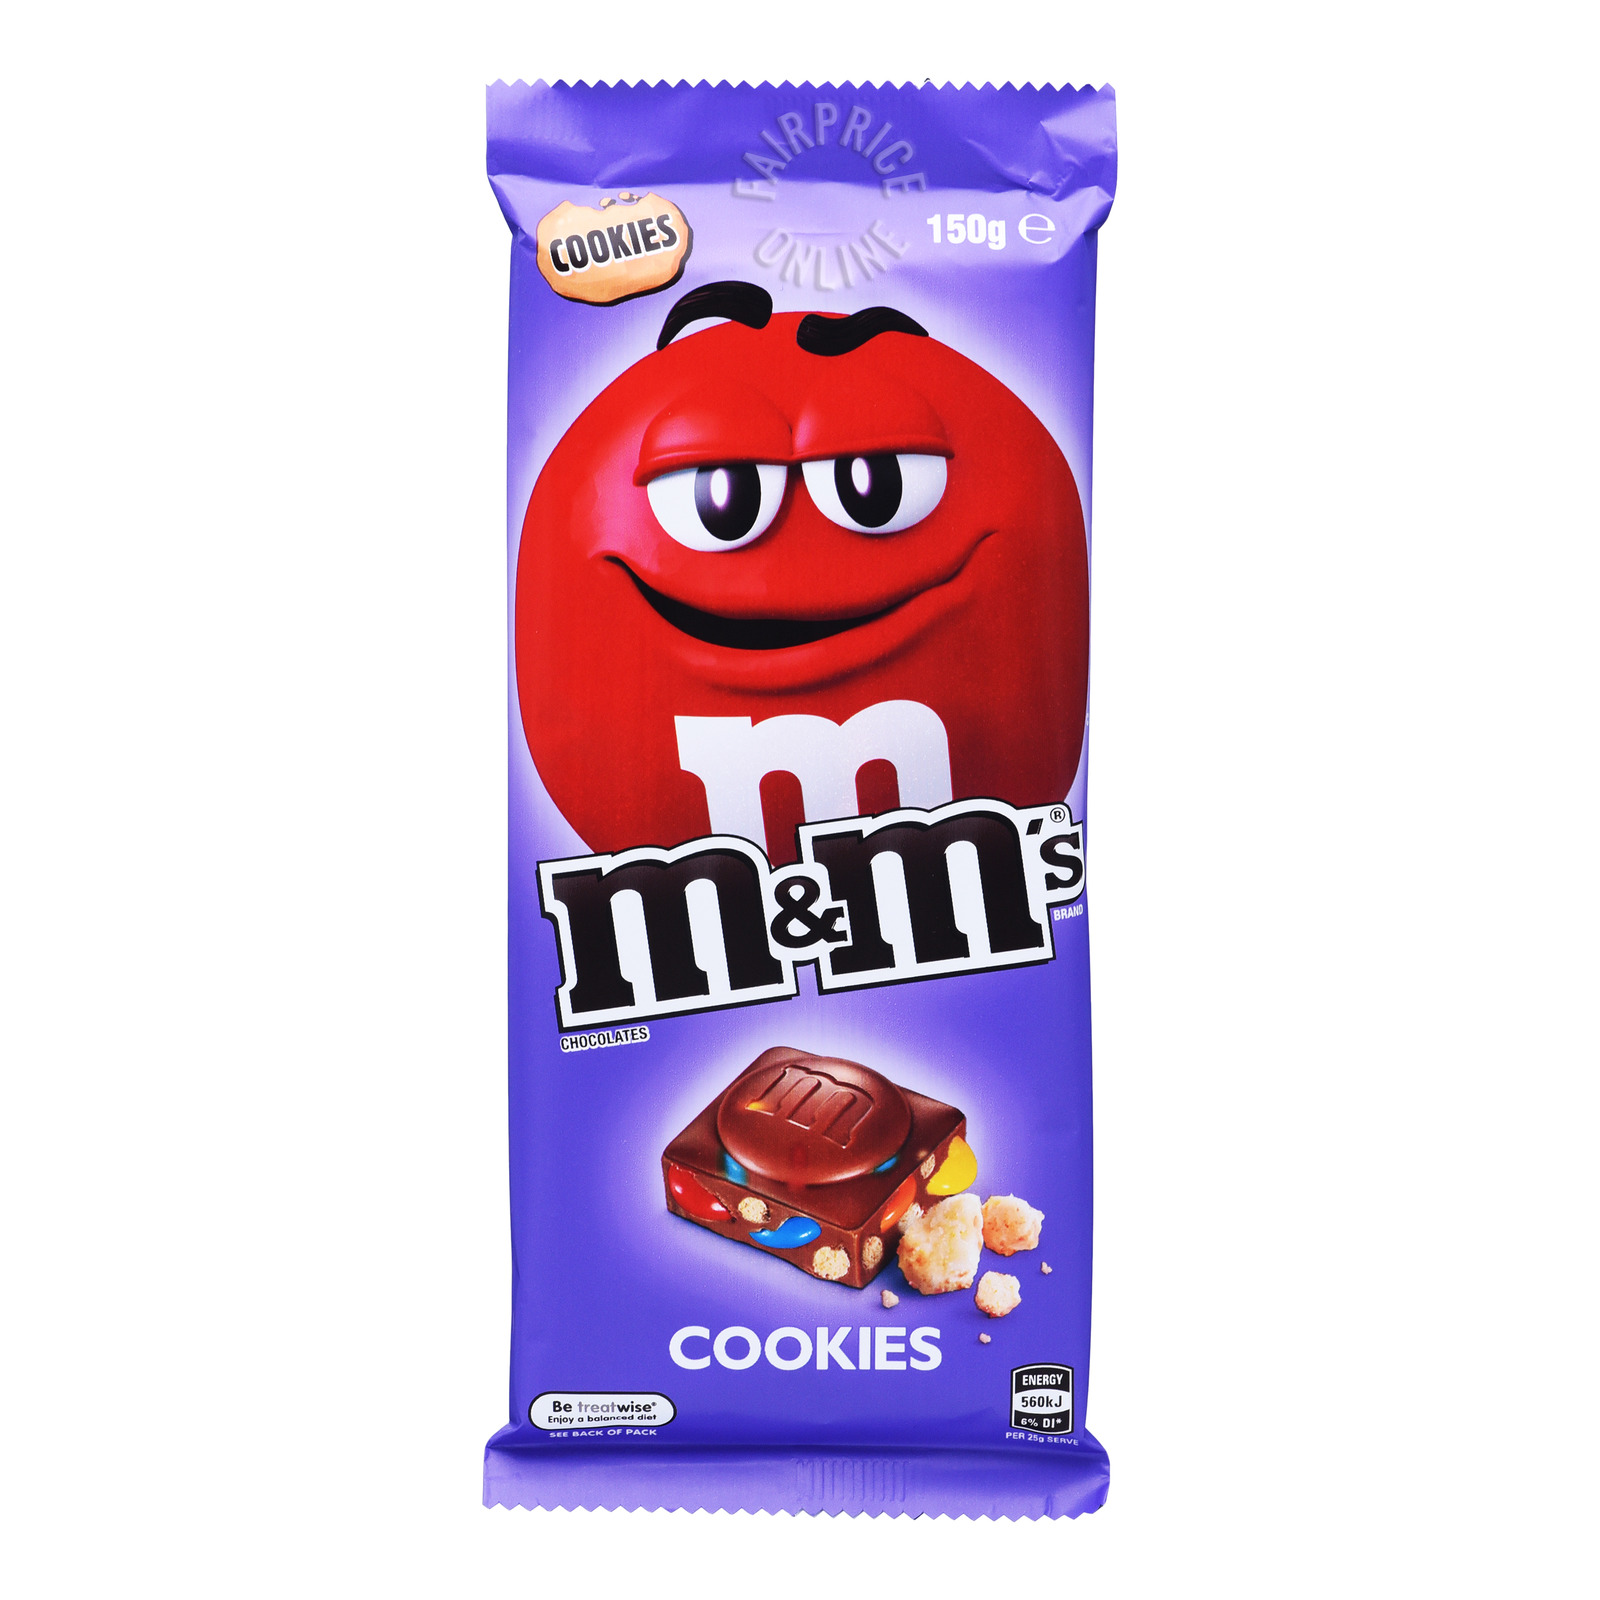 M&M’s Chocolate Bars now available at FairPrice for $4.40 - 6